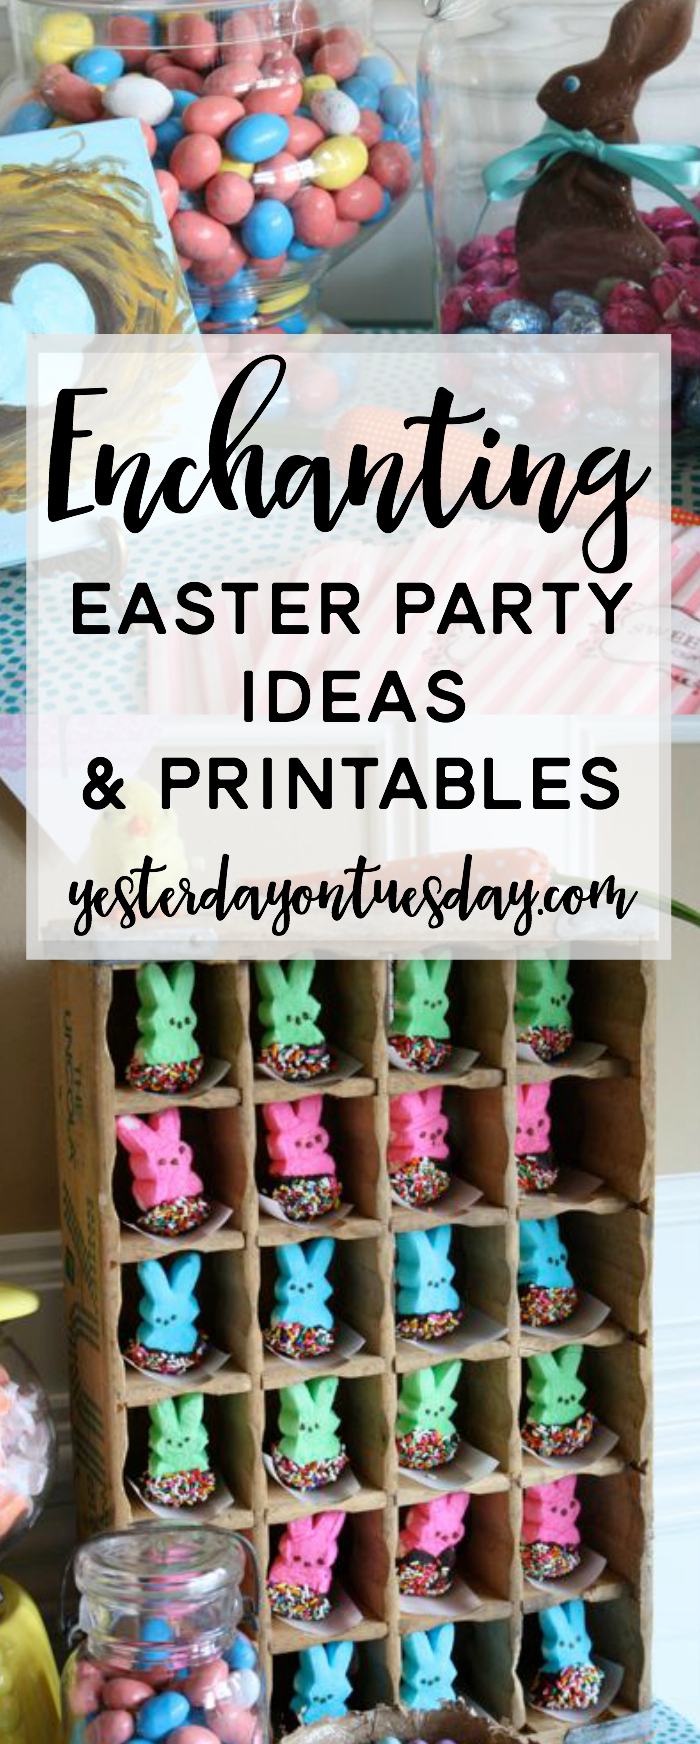 Enchanting Easter Party Ideas and Printables: Thrifty and chic ideas (including vintage finds) for using things you already have to decorate your home for Easter and an Easter Party! Fun Easter treat ideas too.